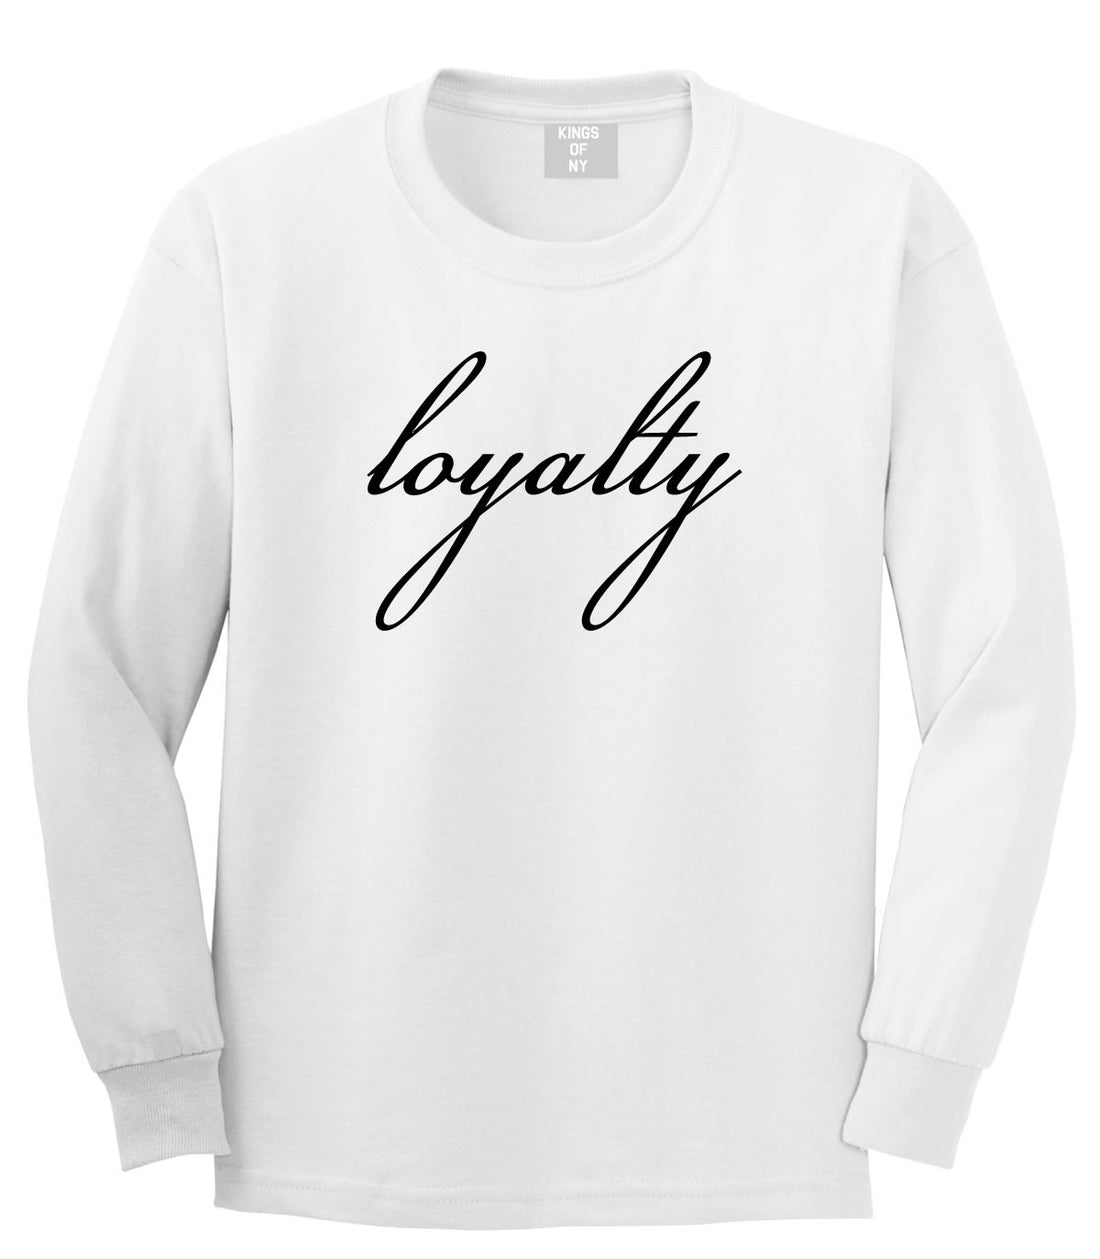 Loyalty Respect Aint New York Hoes Long Sleeve Boys Kids T-Shirt in White by Kings Of NY